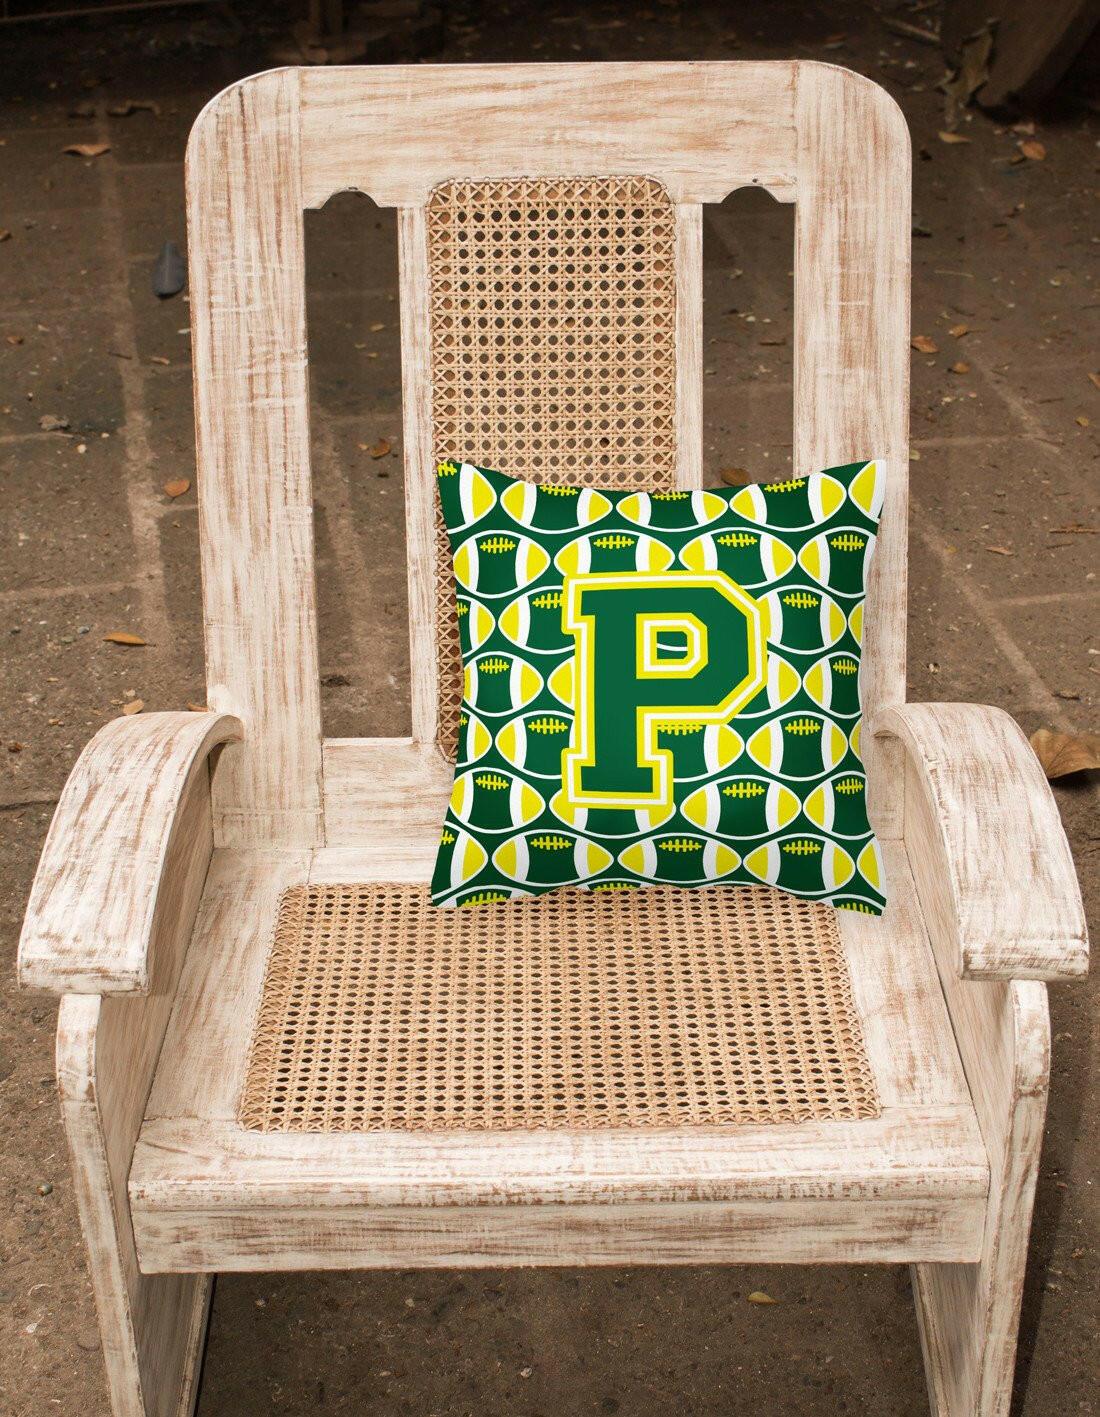 Letter P Football Green and Yellow Fabric Decorative Pillow CJ1075-PPW1414 by Caroline's Treasures